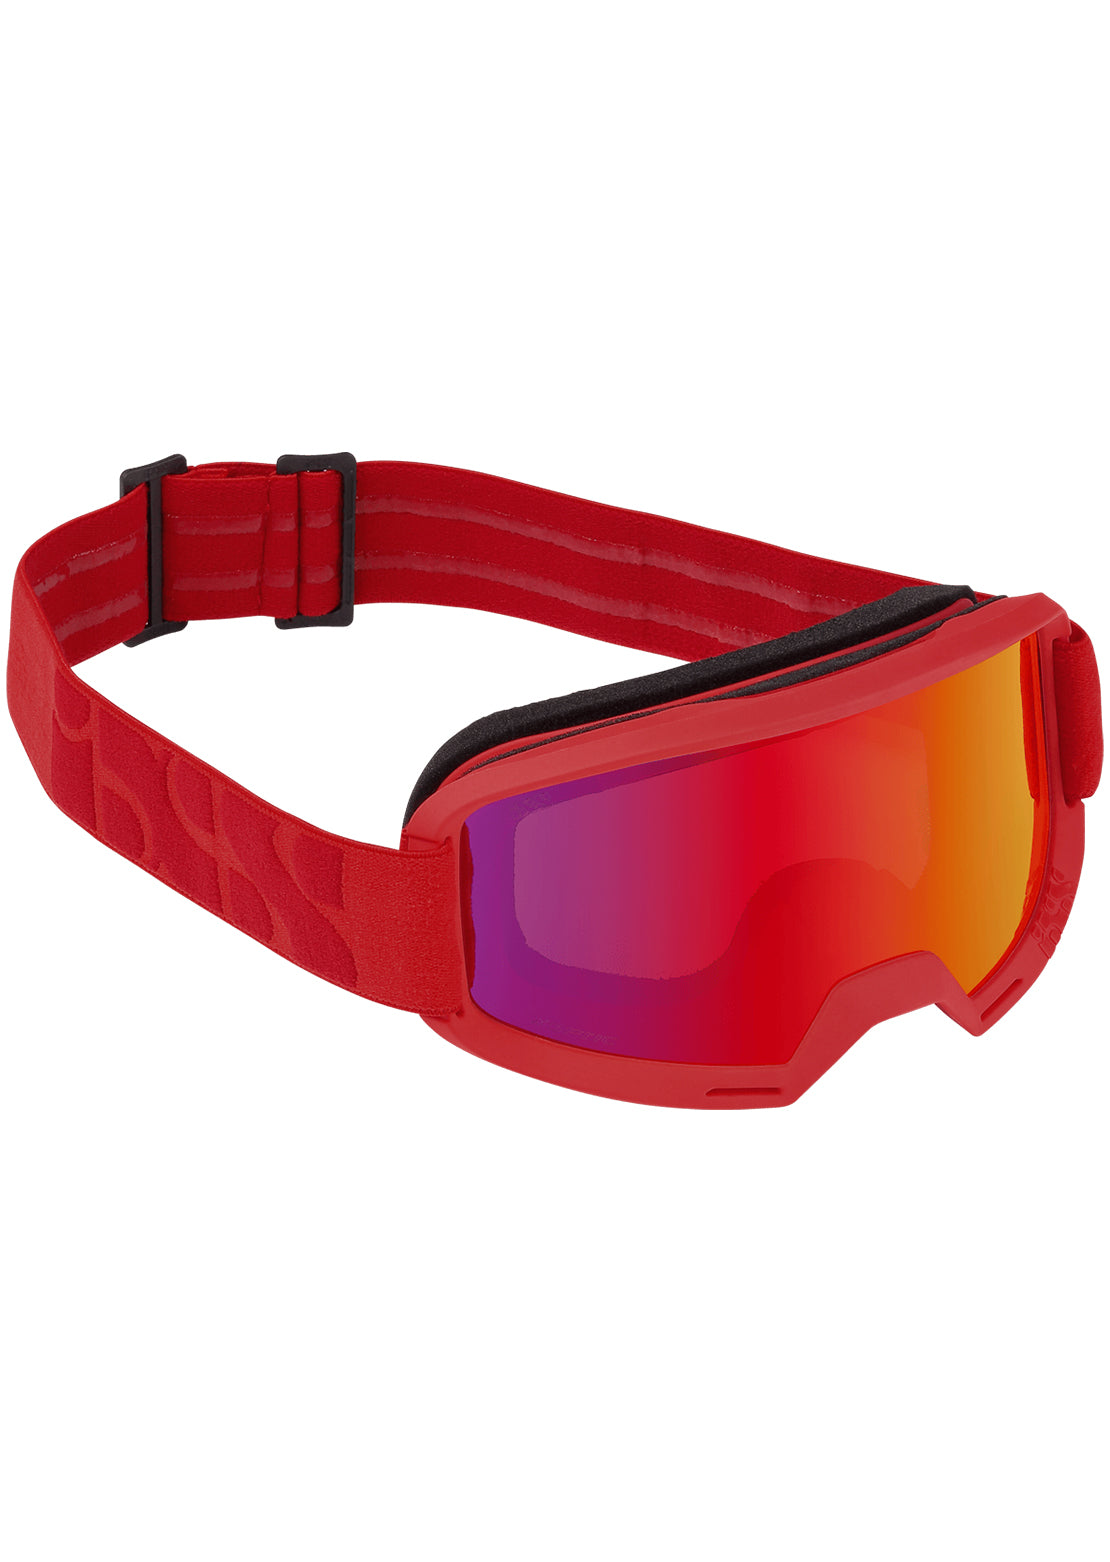 IXS Hack Goggle Red/Mirror Red